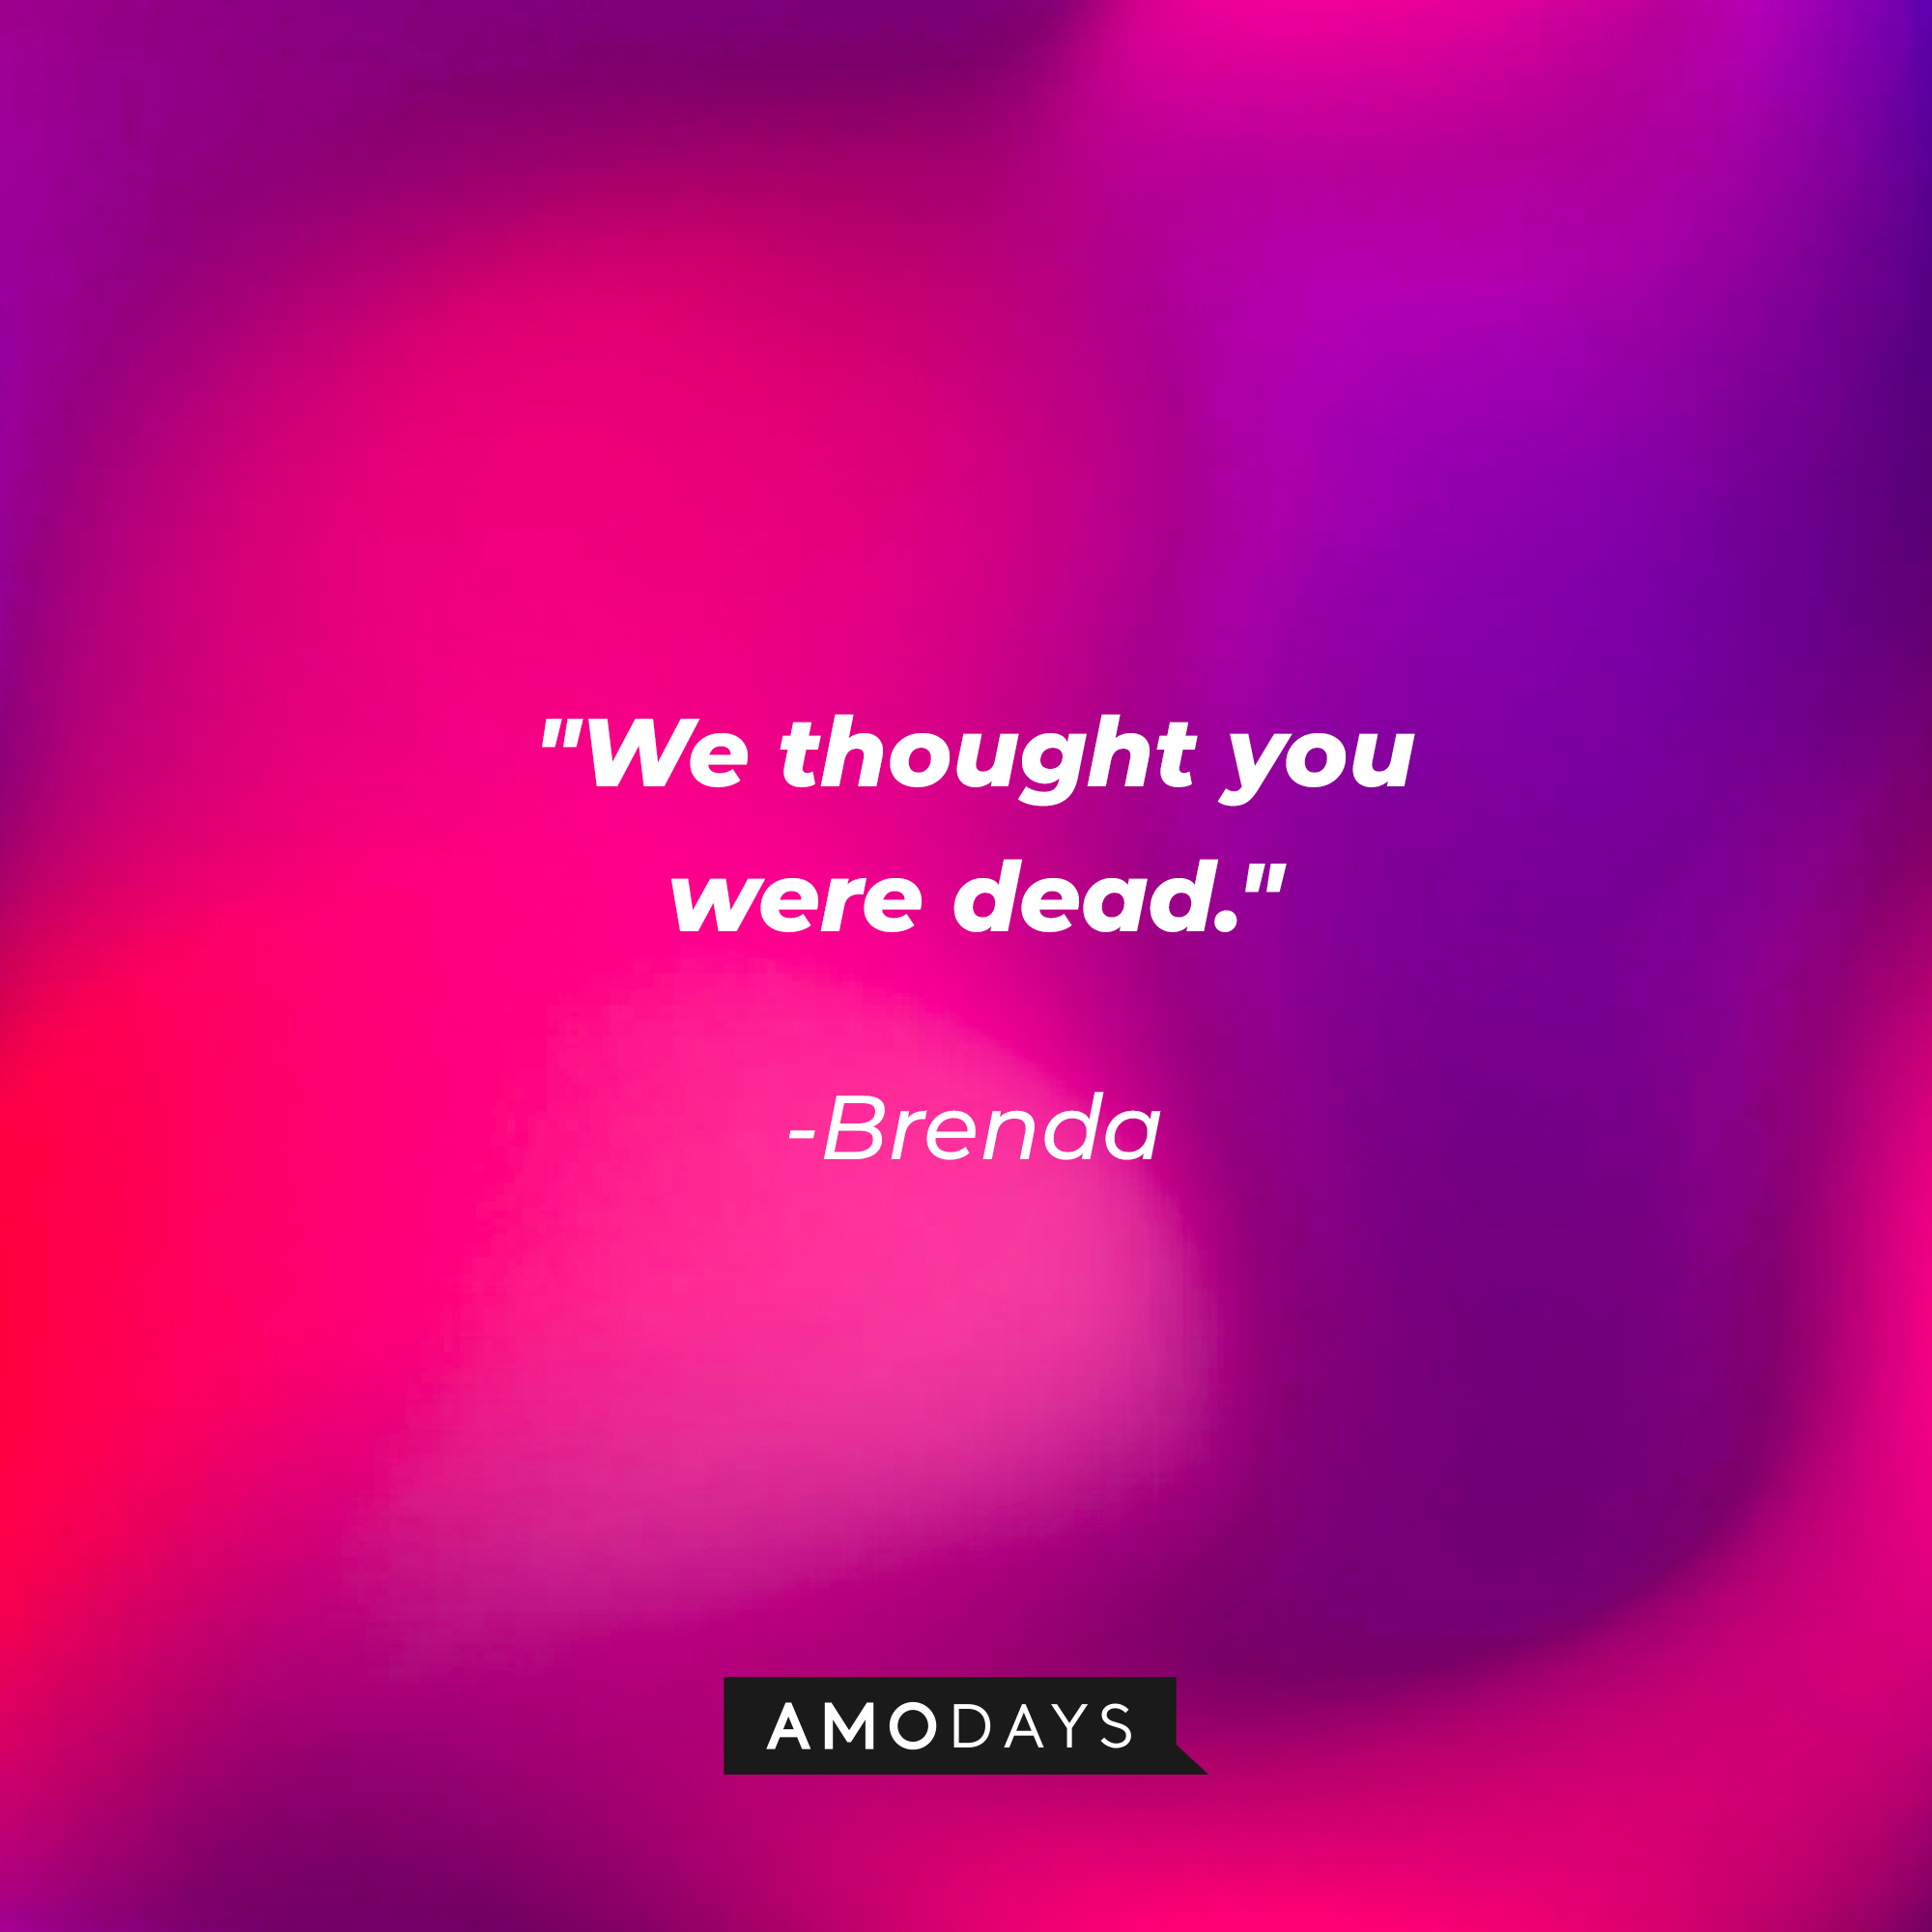 Brenda's quote: "We thought you were dead." | Source: Amodays